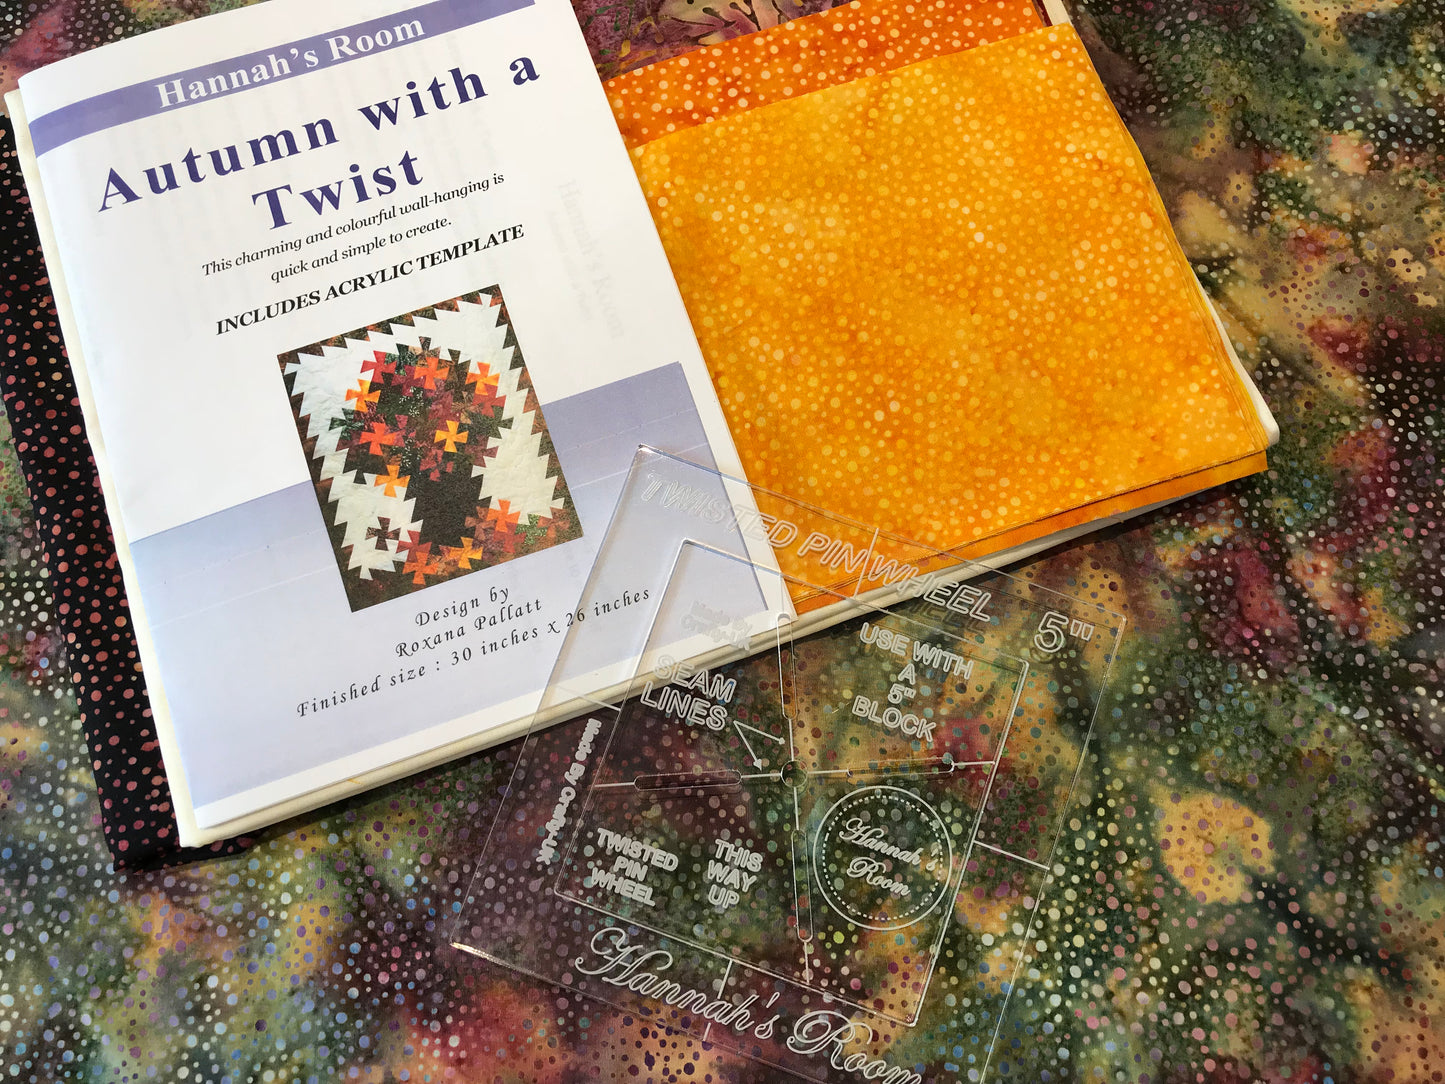 Autumn with a Twist Quilt Kit with ACRYLIC TEMPLATE INCLUDED